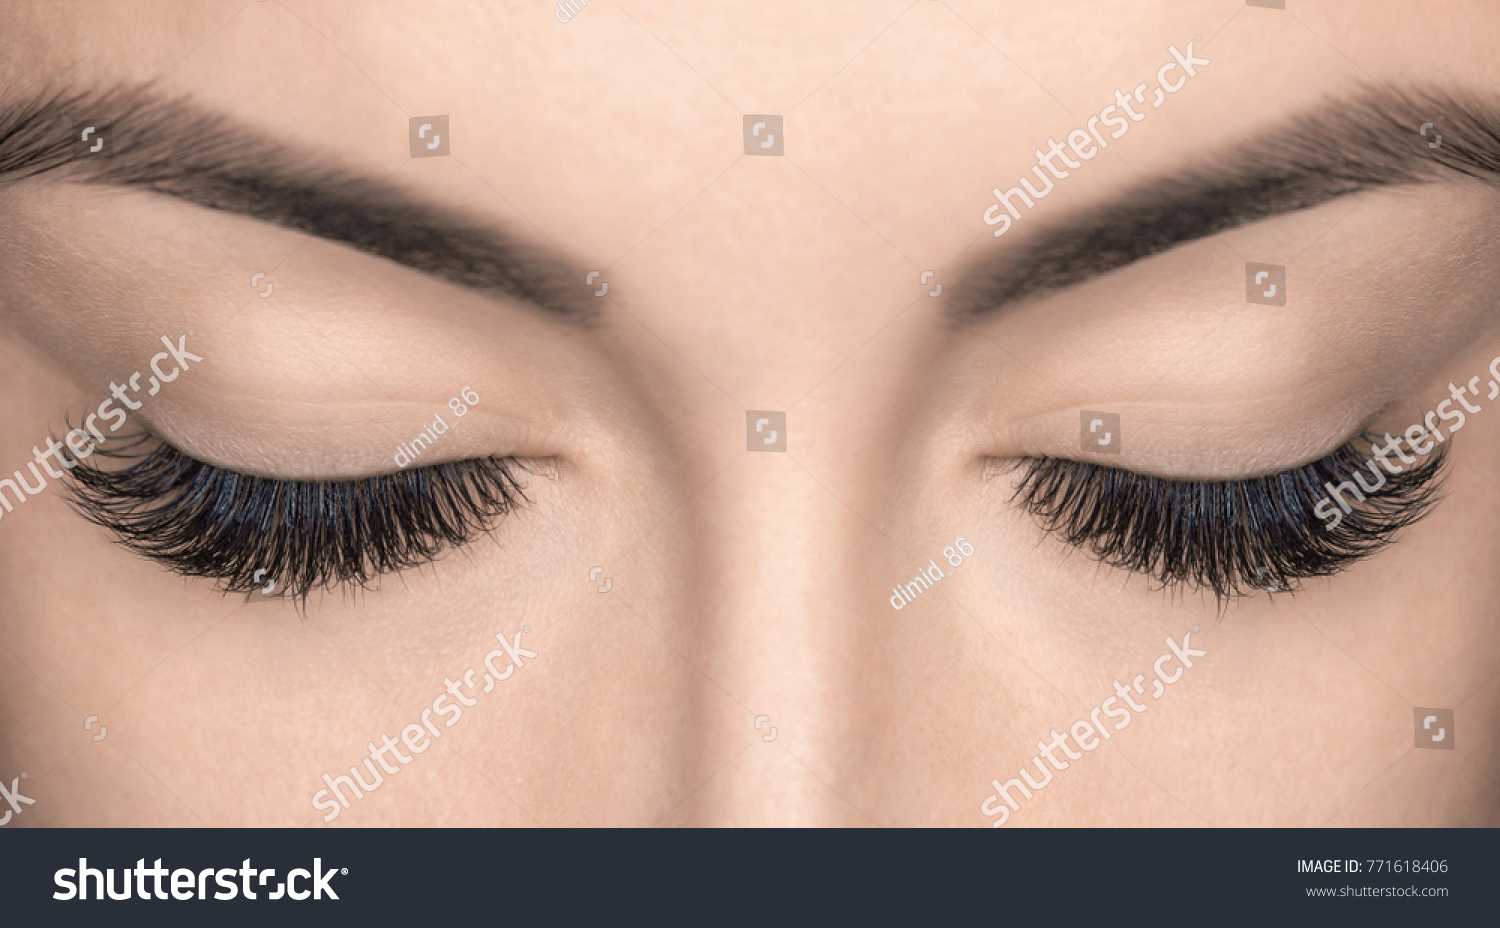 Eyelash extension procedure. Beautiful Woman with long lashes in a beauty salon.  #771618406